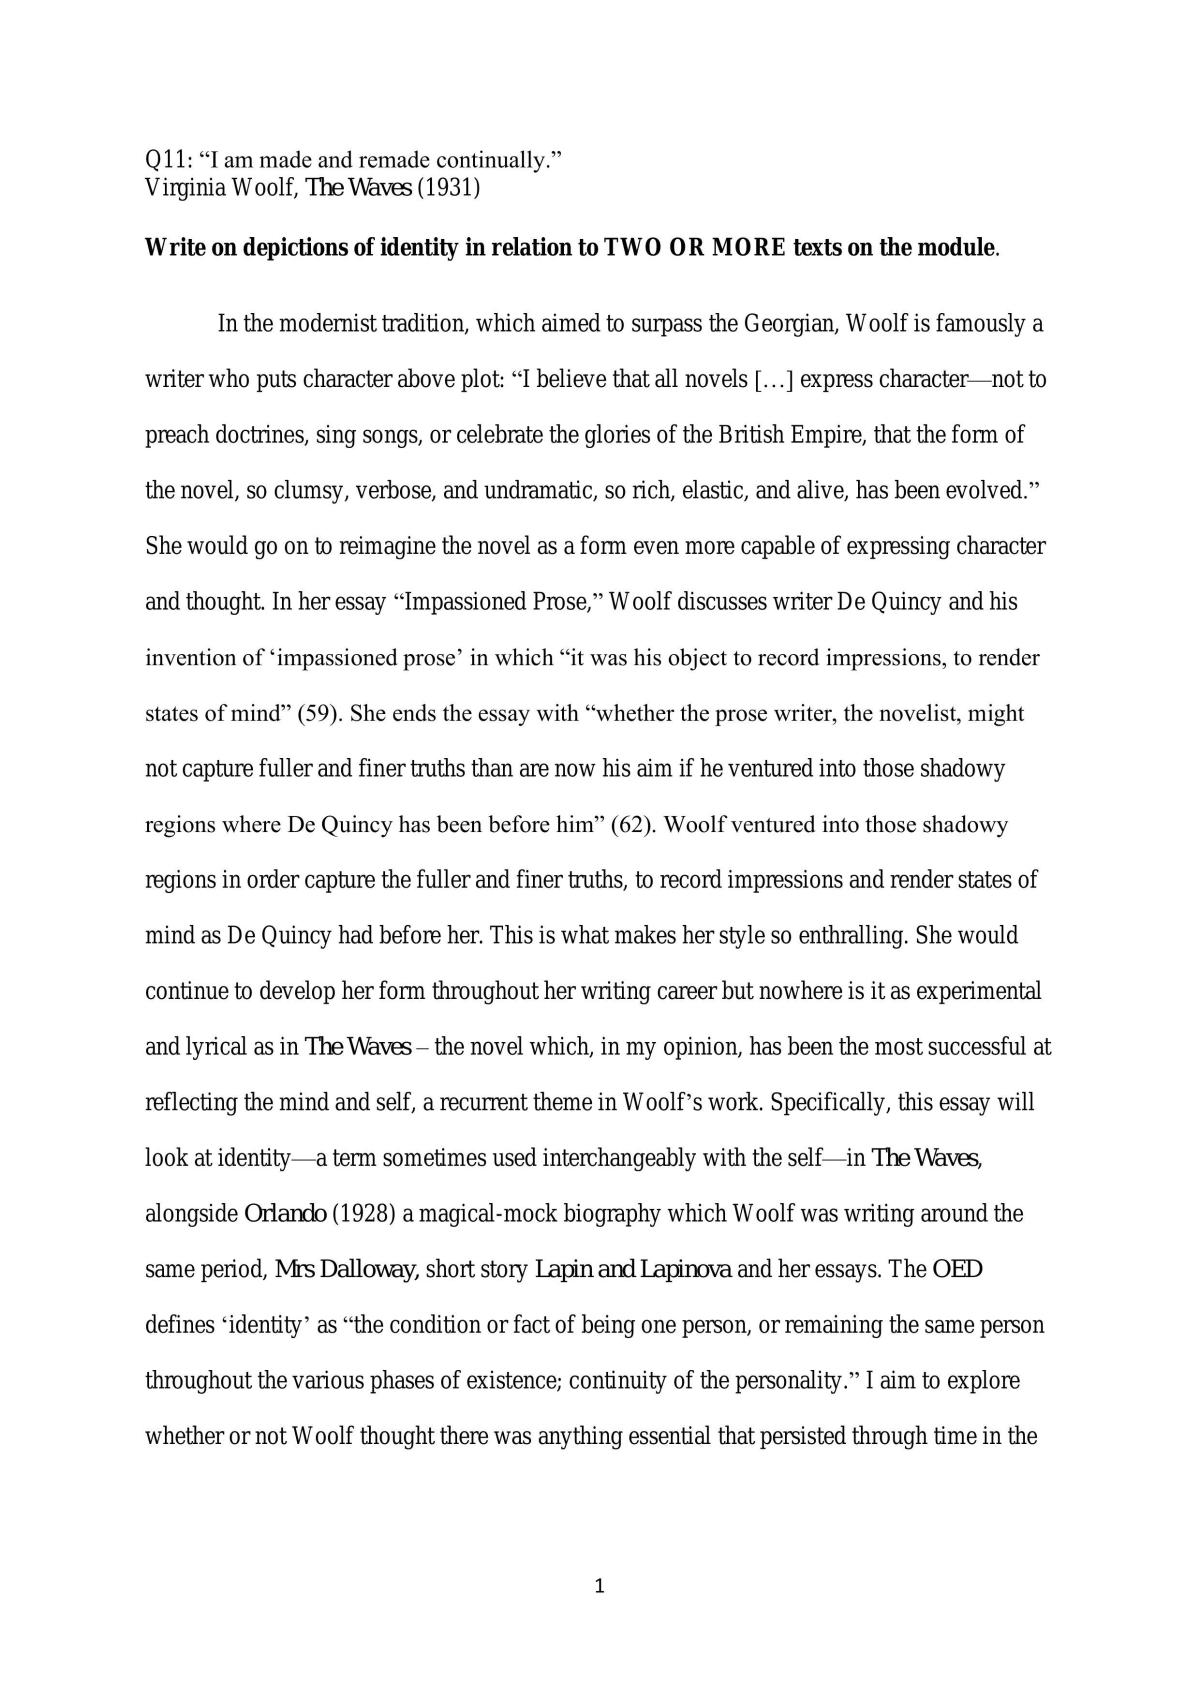 Identity and Self in Virginia Woolf - Page 1